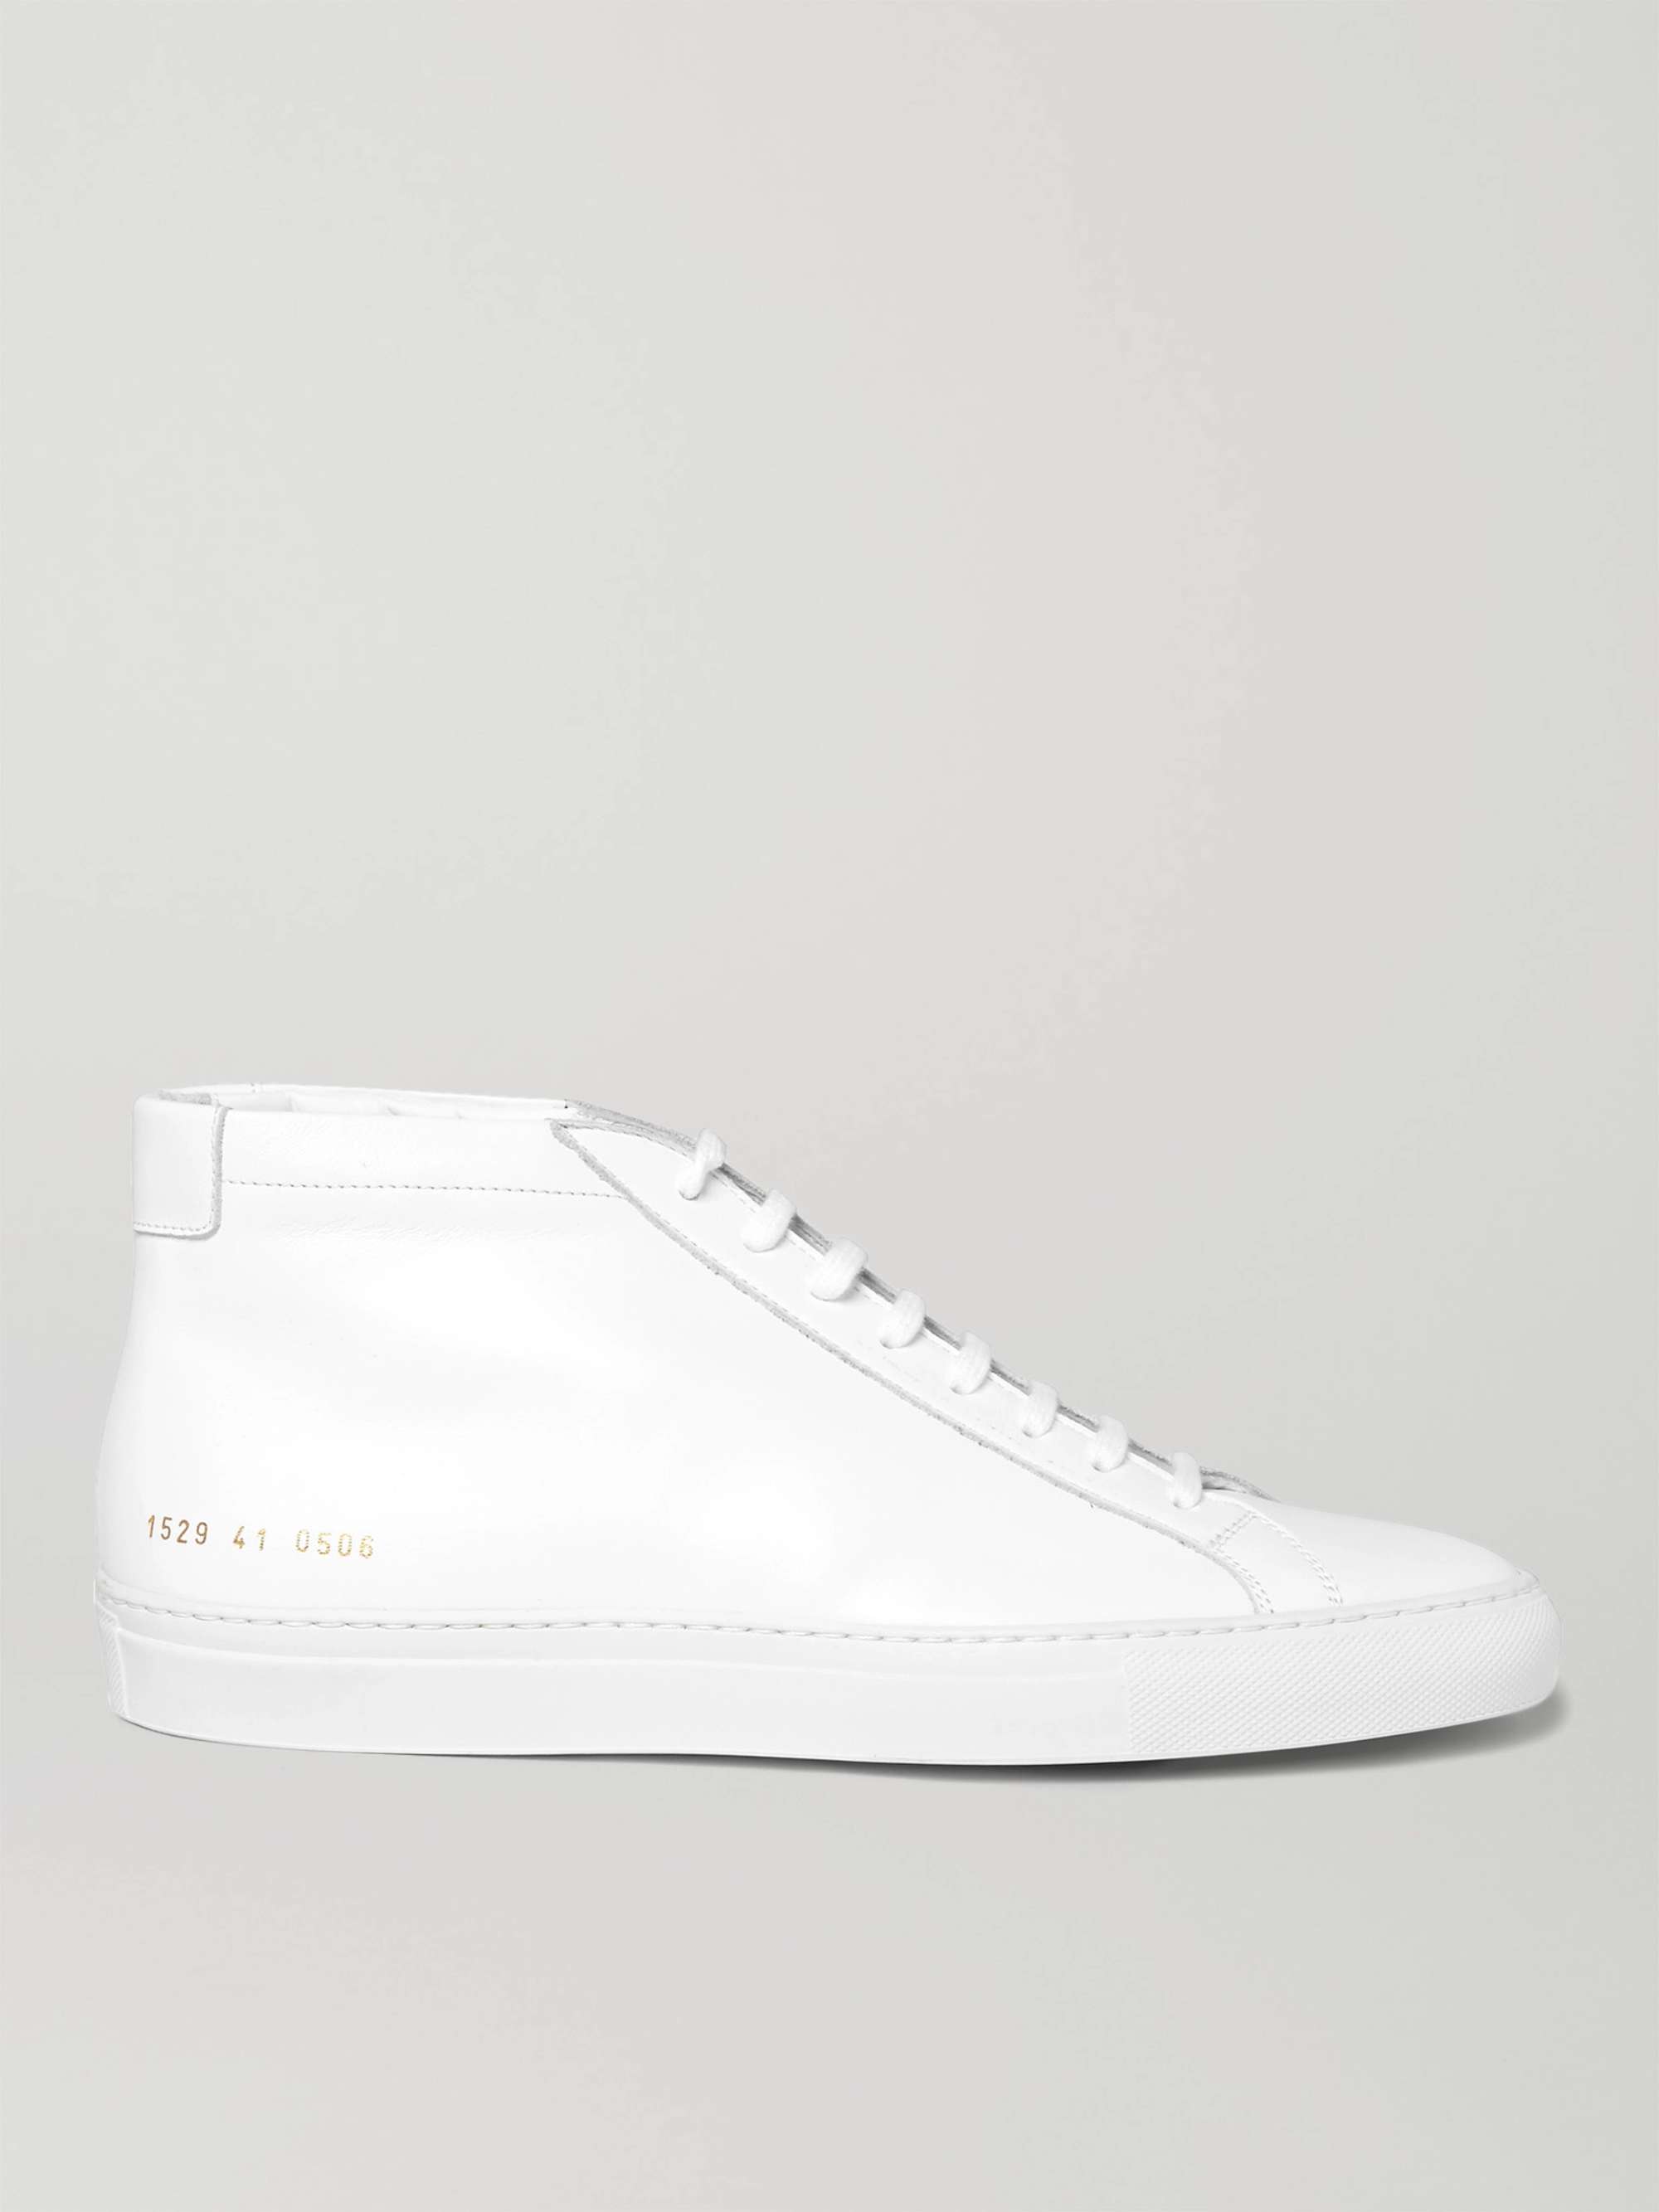 Diplomacy Consider experimental White Original Achilles Leather High-Top Sneakers | COMMON PROJECTS | MR  PORTER